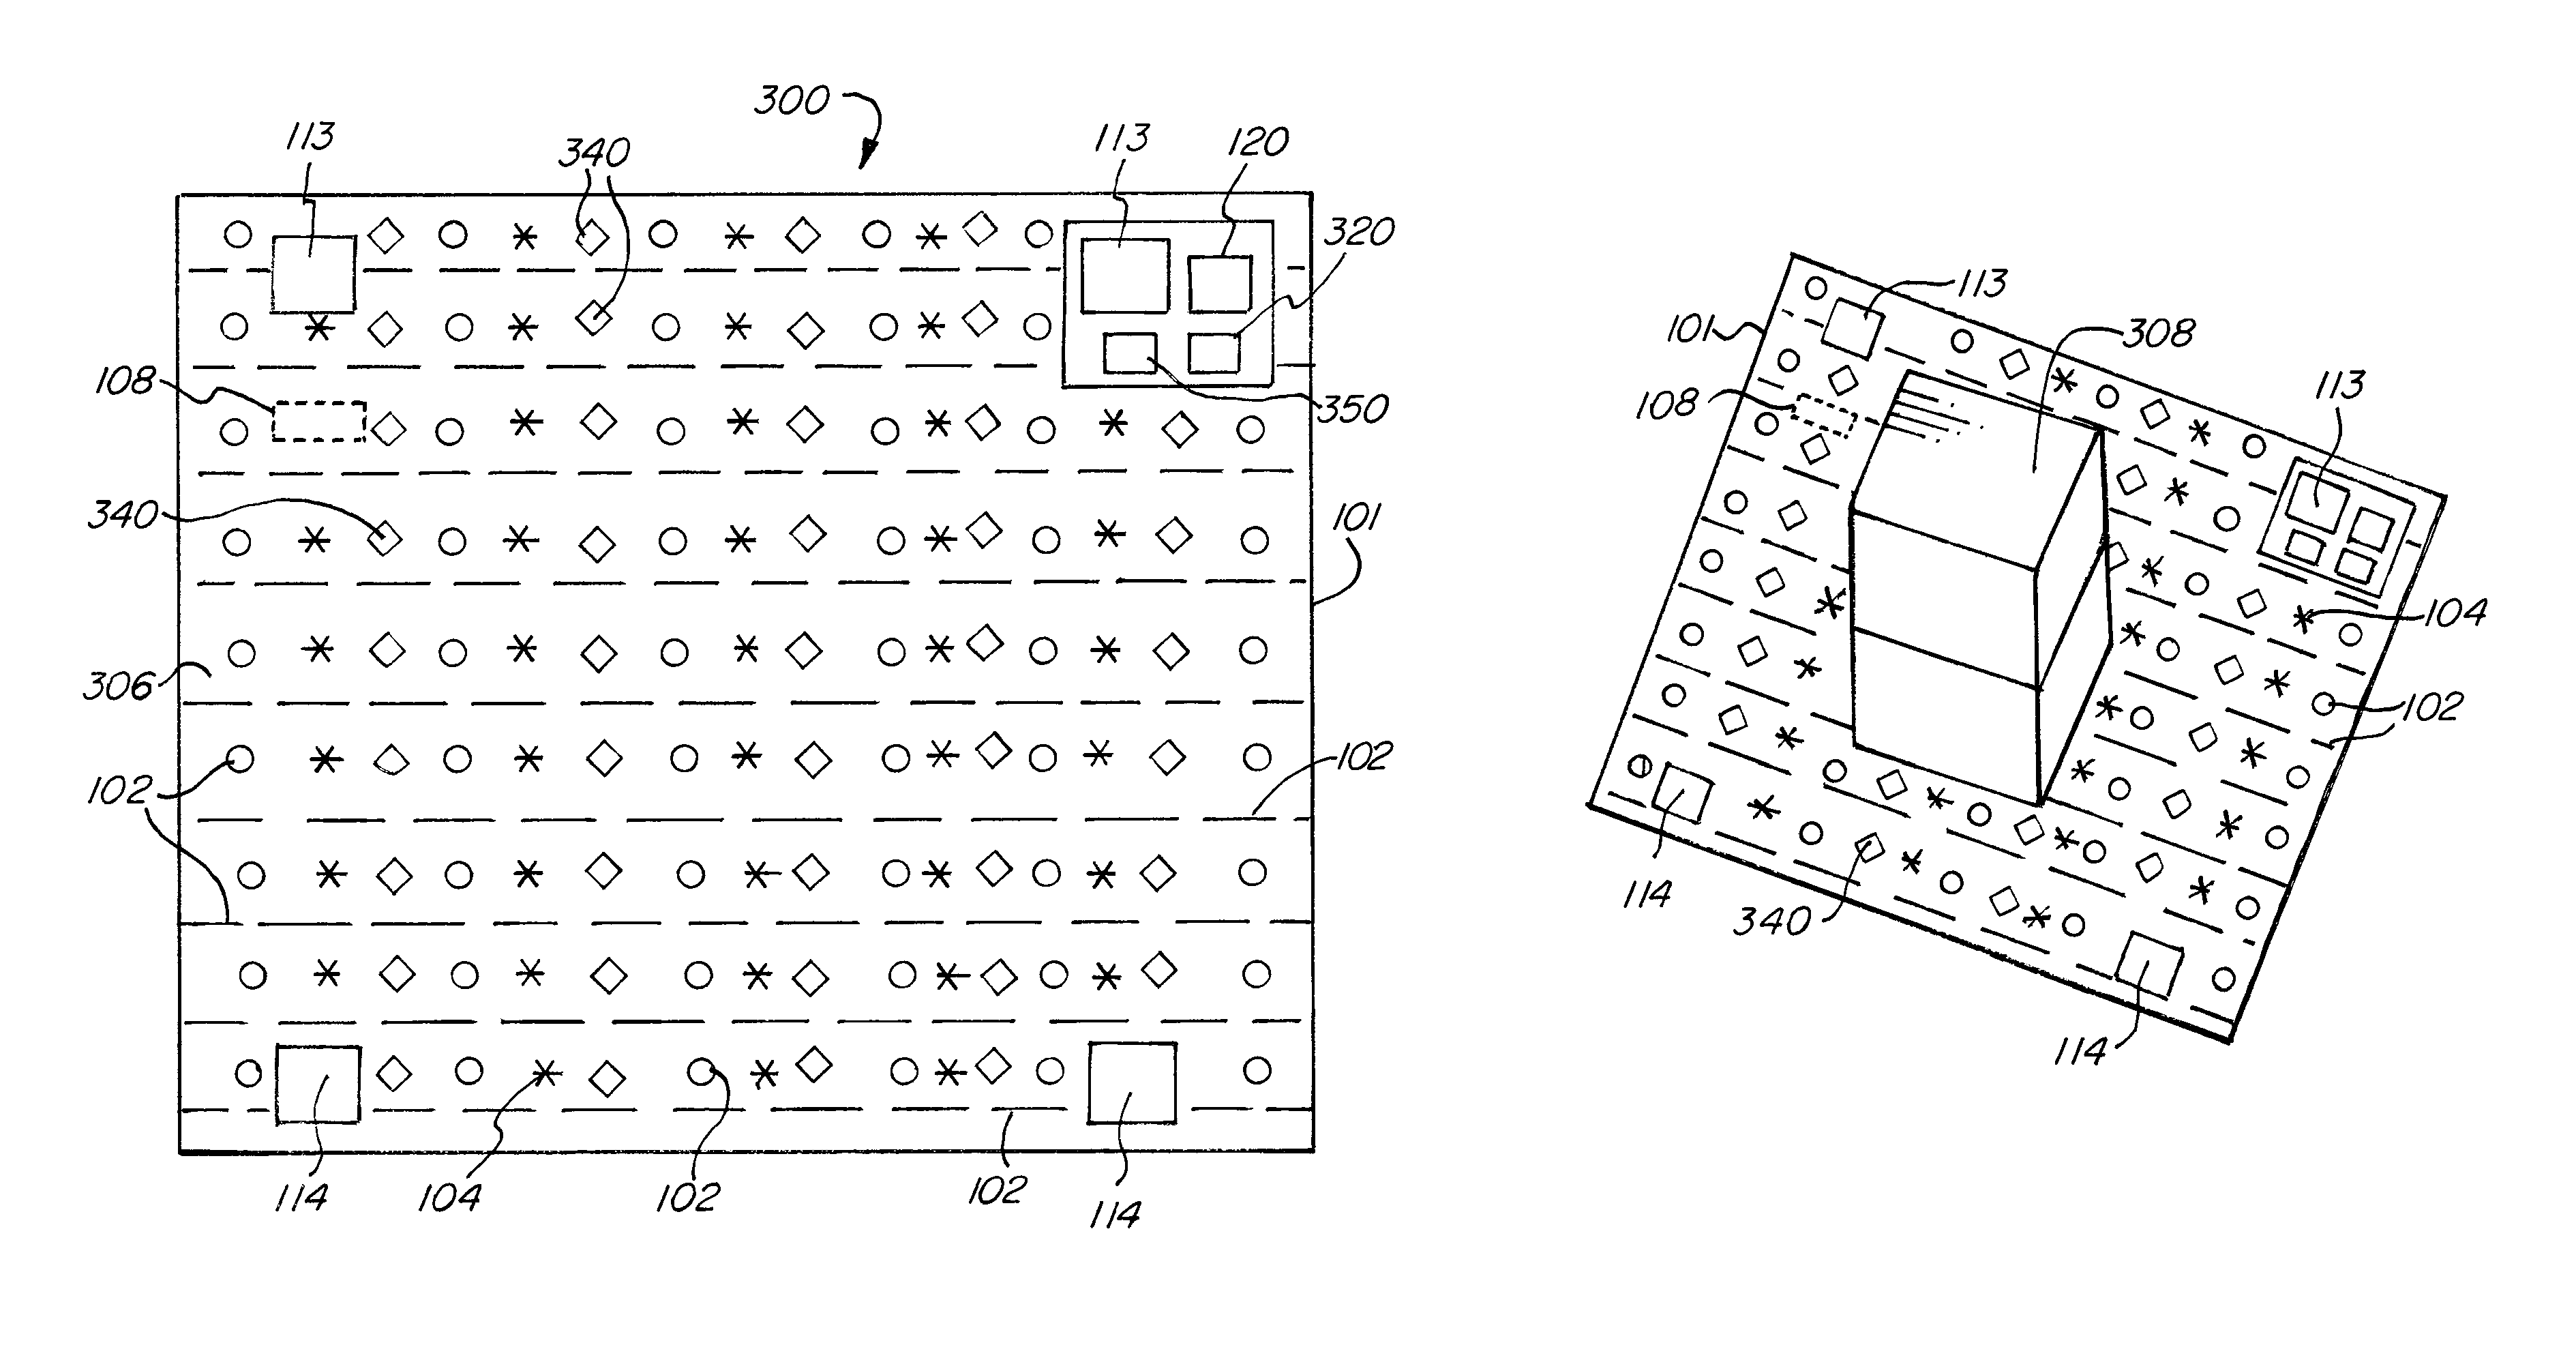 Self-fitting, self-adjusting, automatically adjusting and/or automatically fitting fastener or closing device for packaging